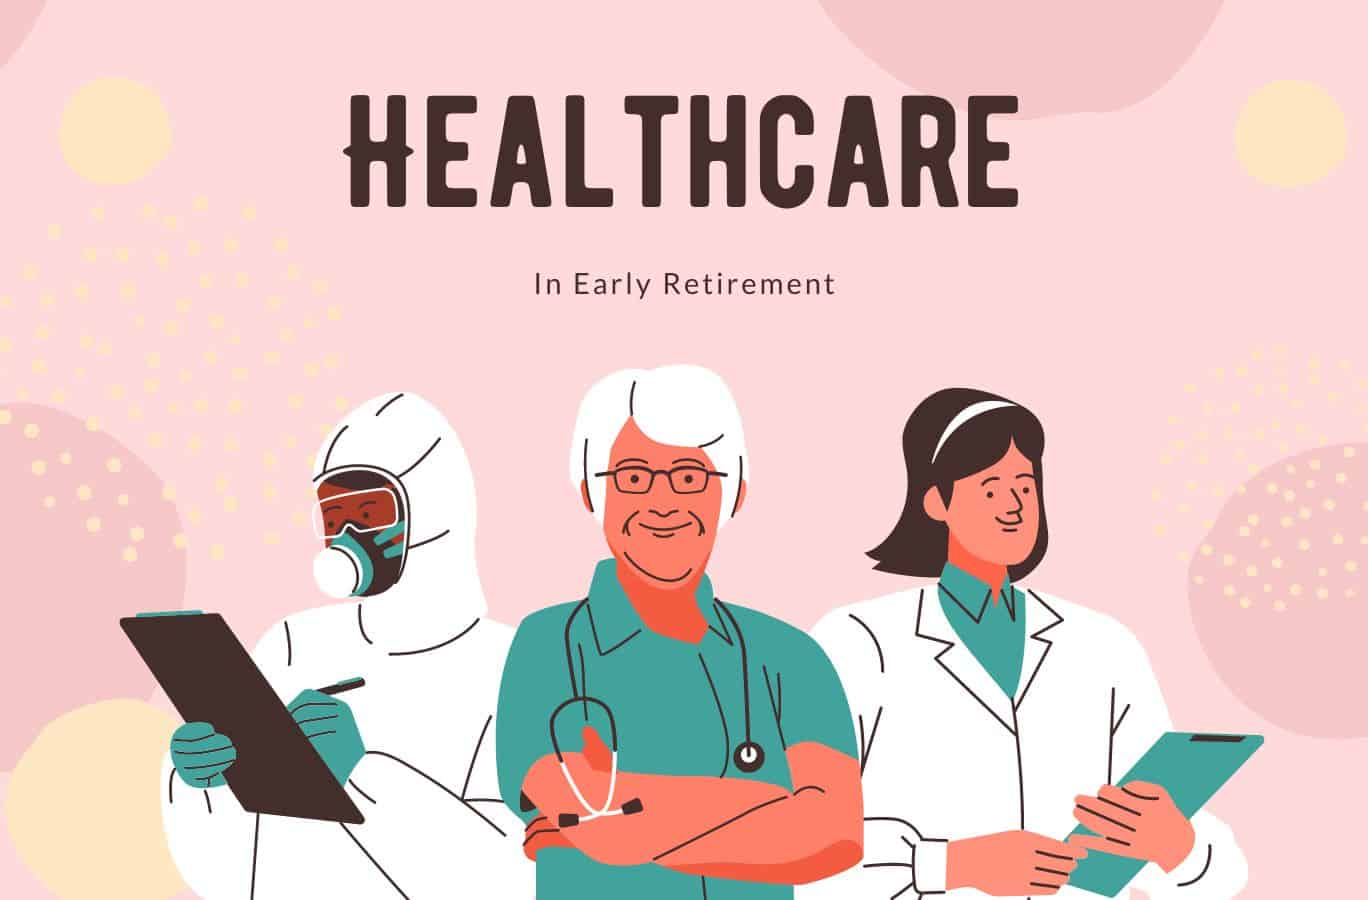 Healthcare in Early Retirement